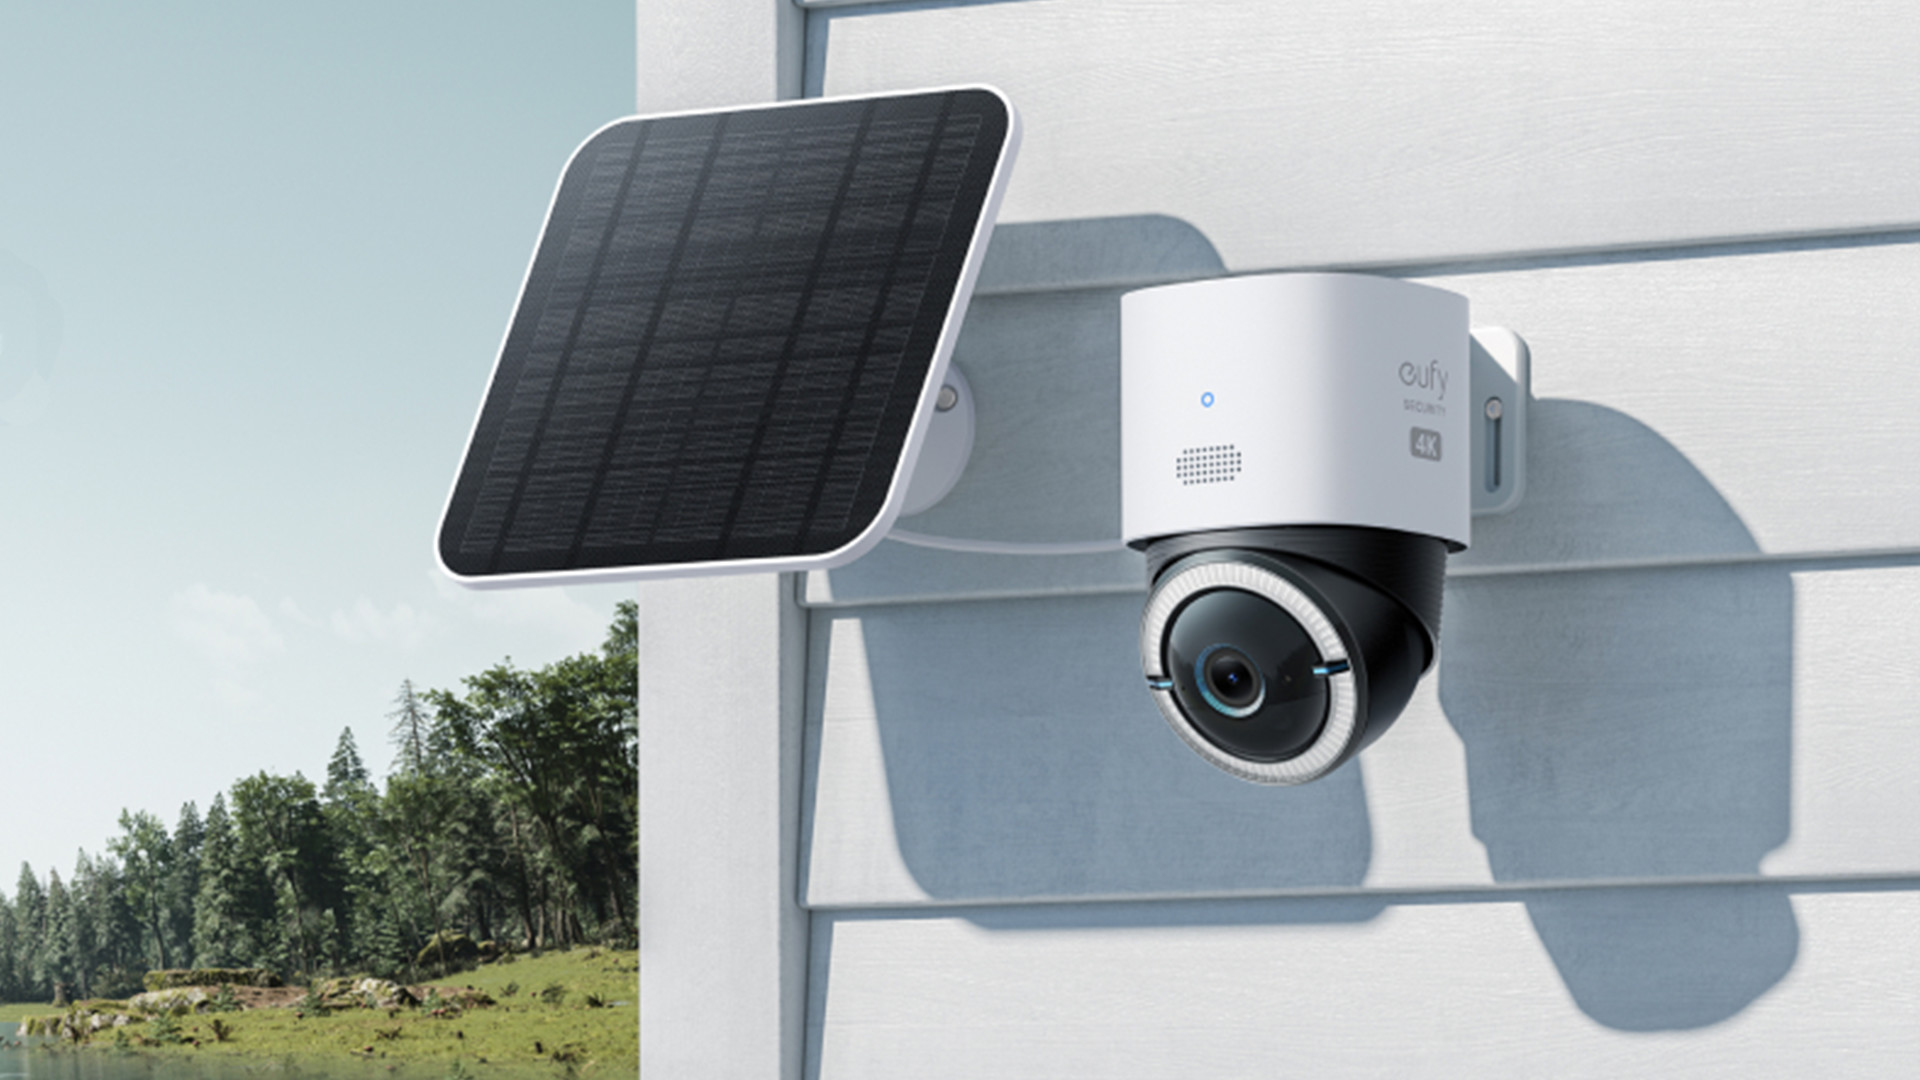 Eufy’s new outdoor 4K security camera can run endlessly on solar power